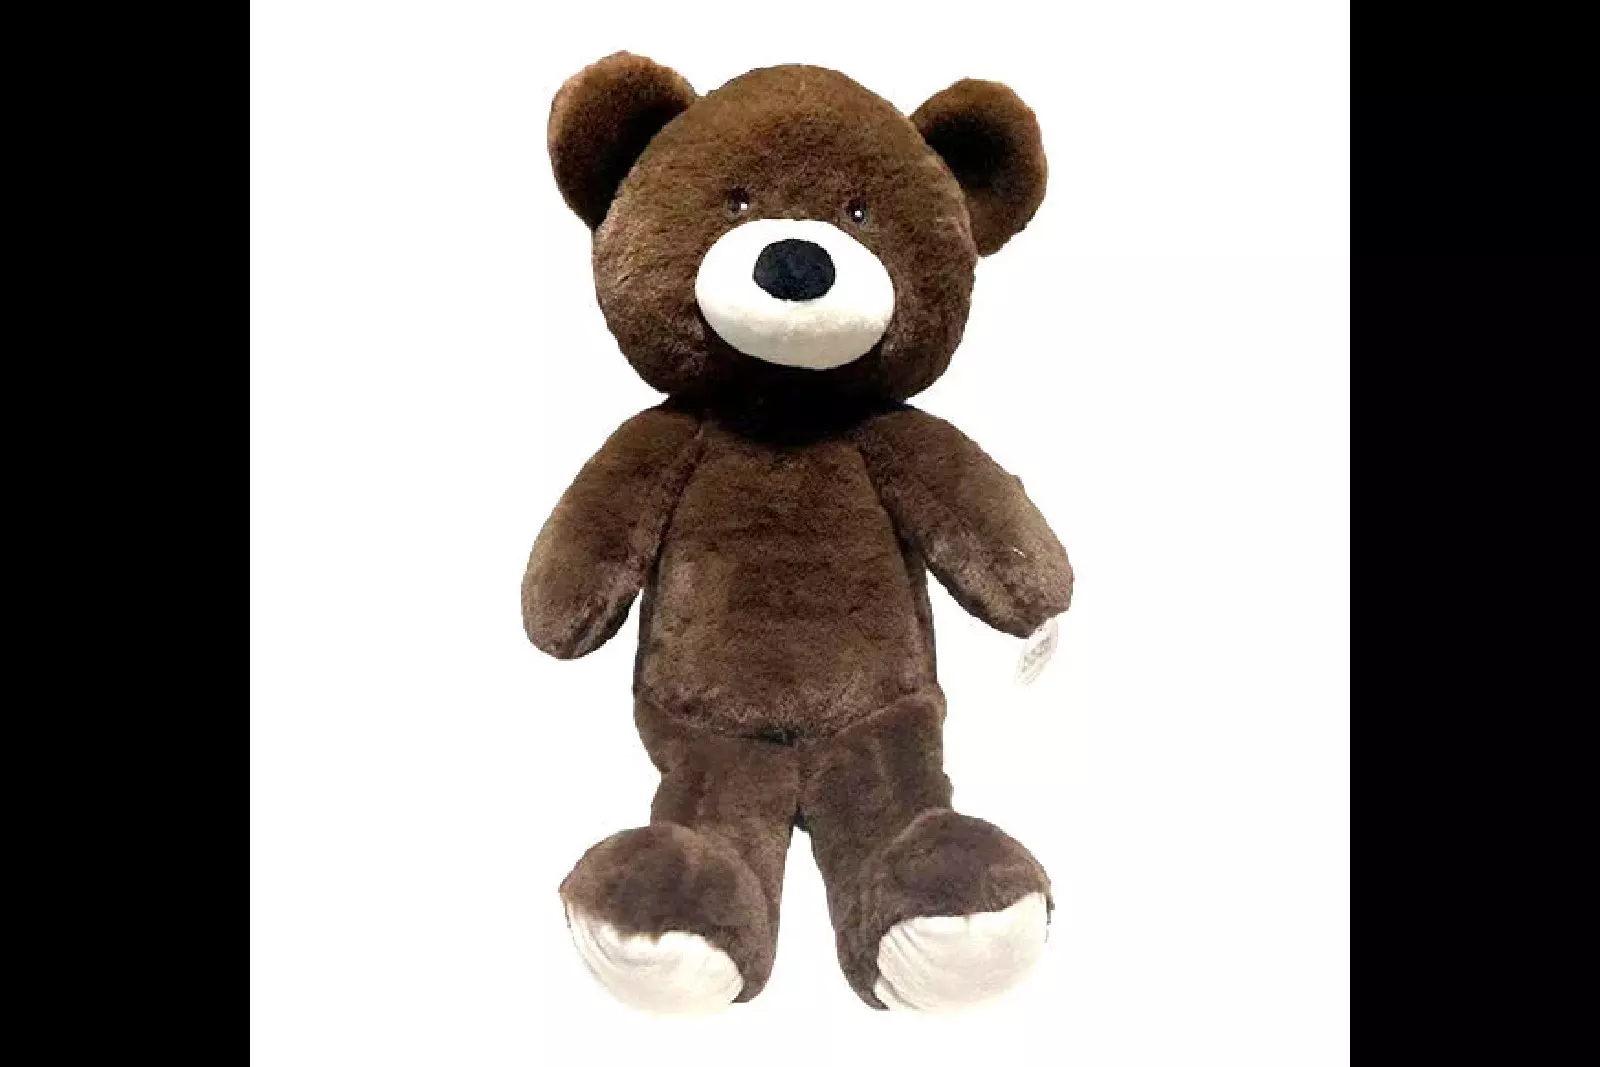 Louis Vuitton x Supreme Teddy Bear Sold For More Than $100,000